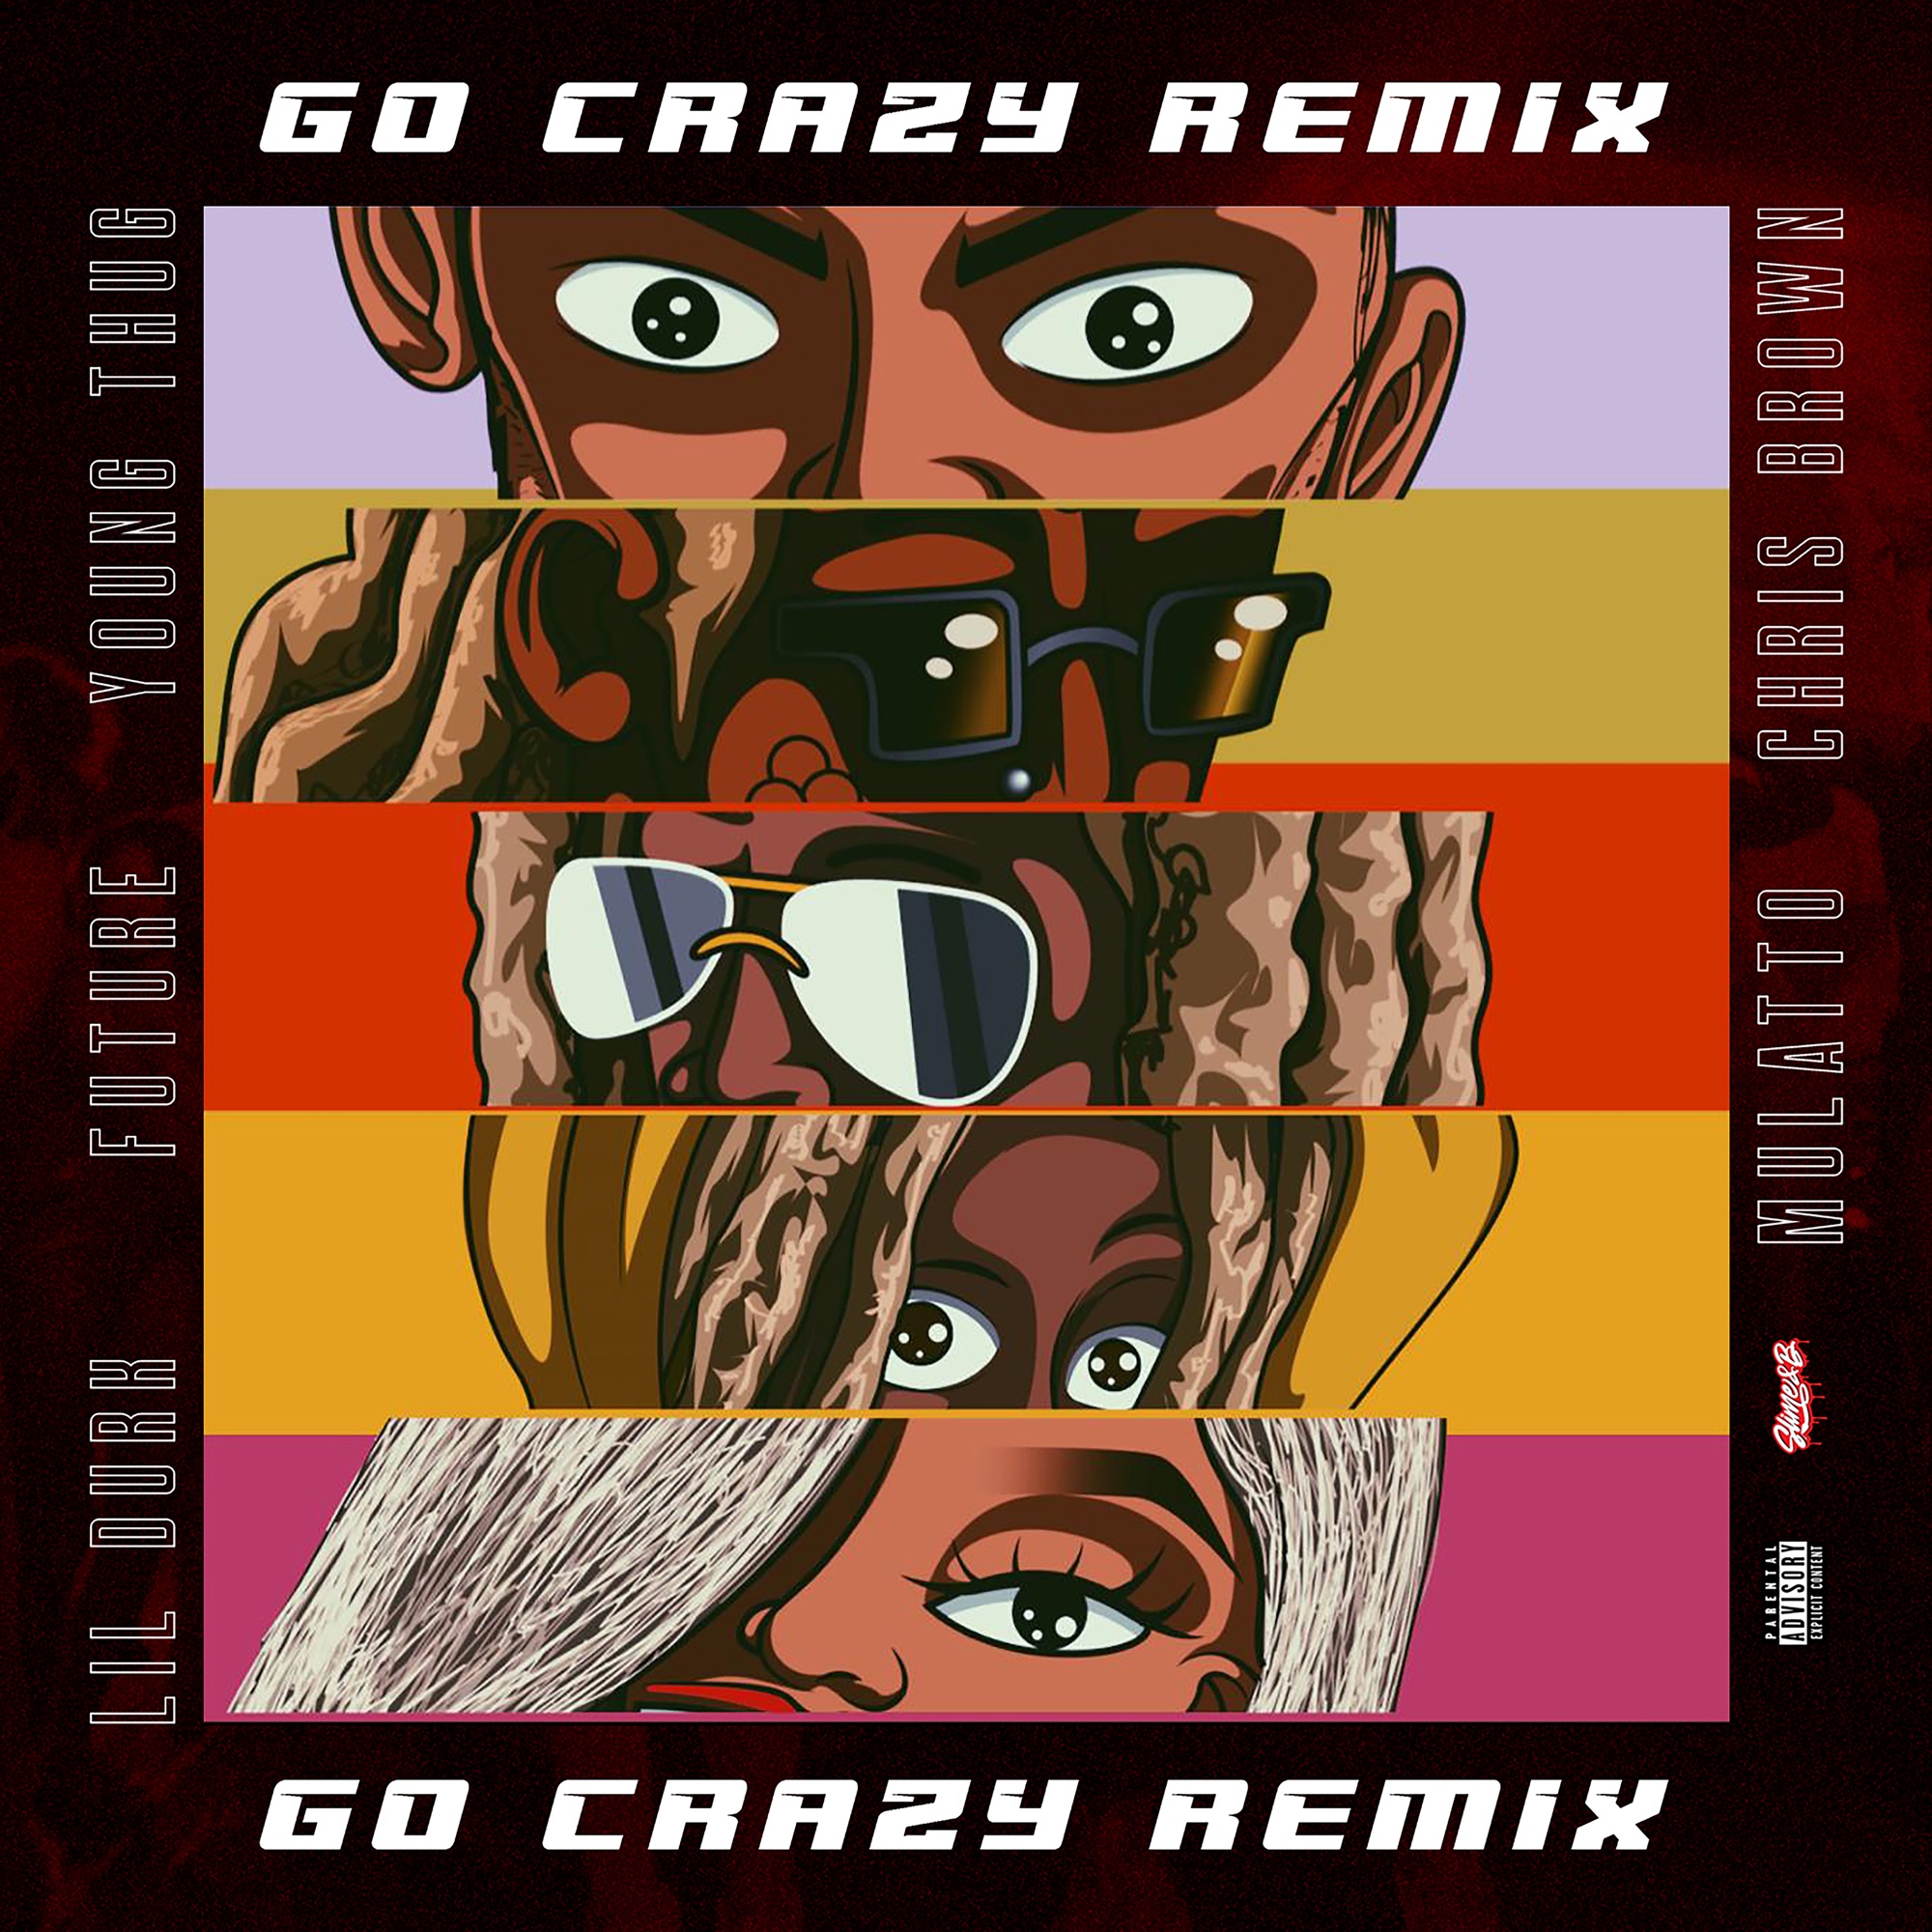 Chris Brown & Young Thug - Go Crazy (Remix) [feat. Future, Lil Durk & Mulatto] - Single